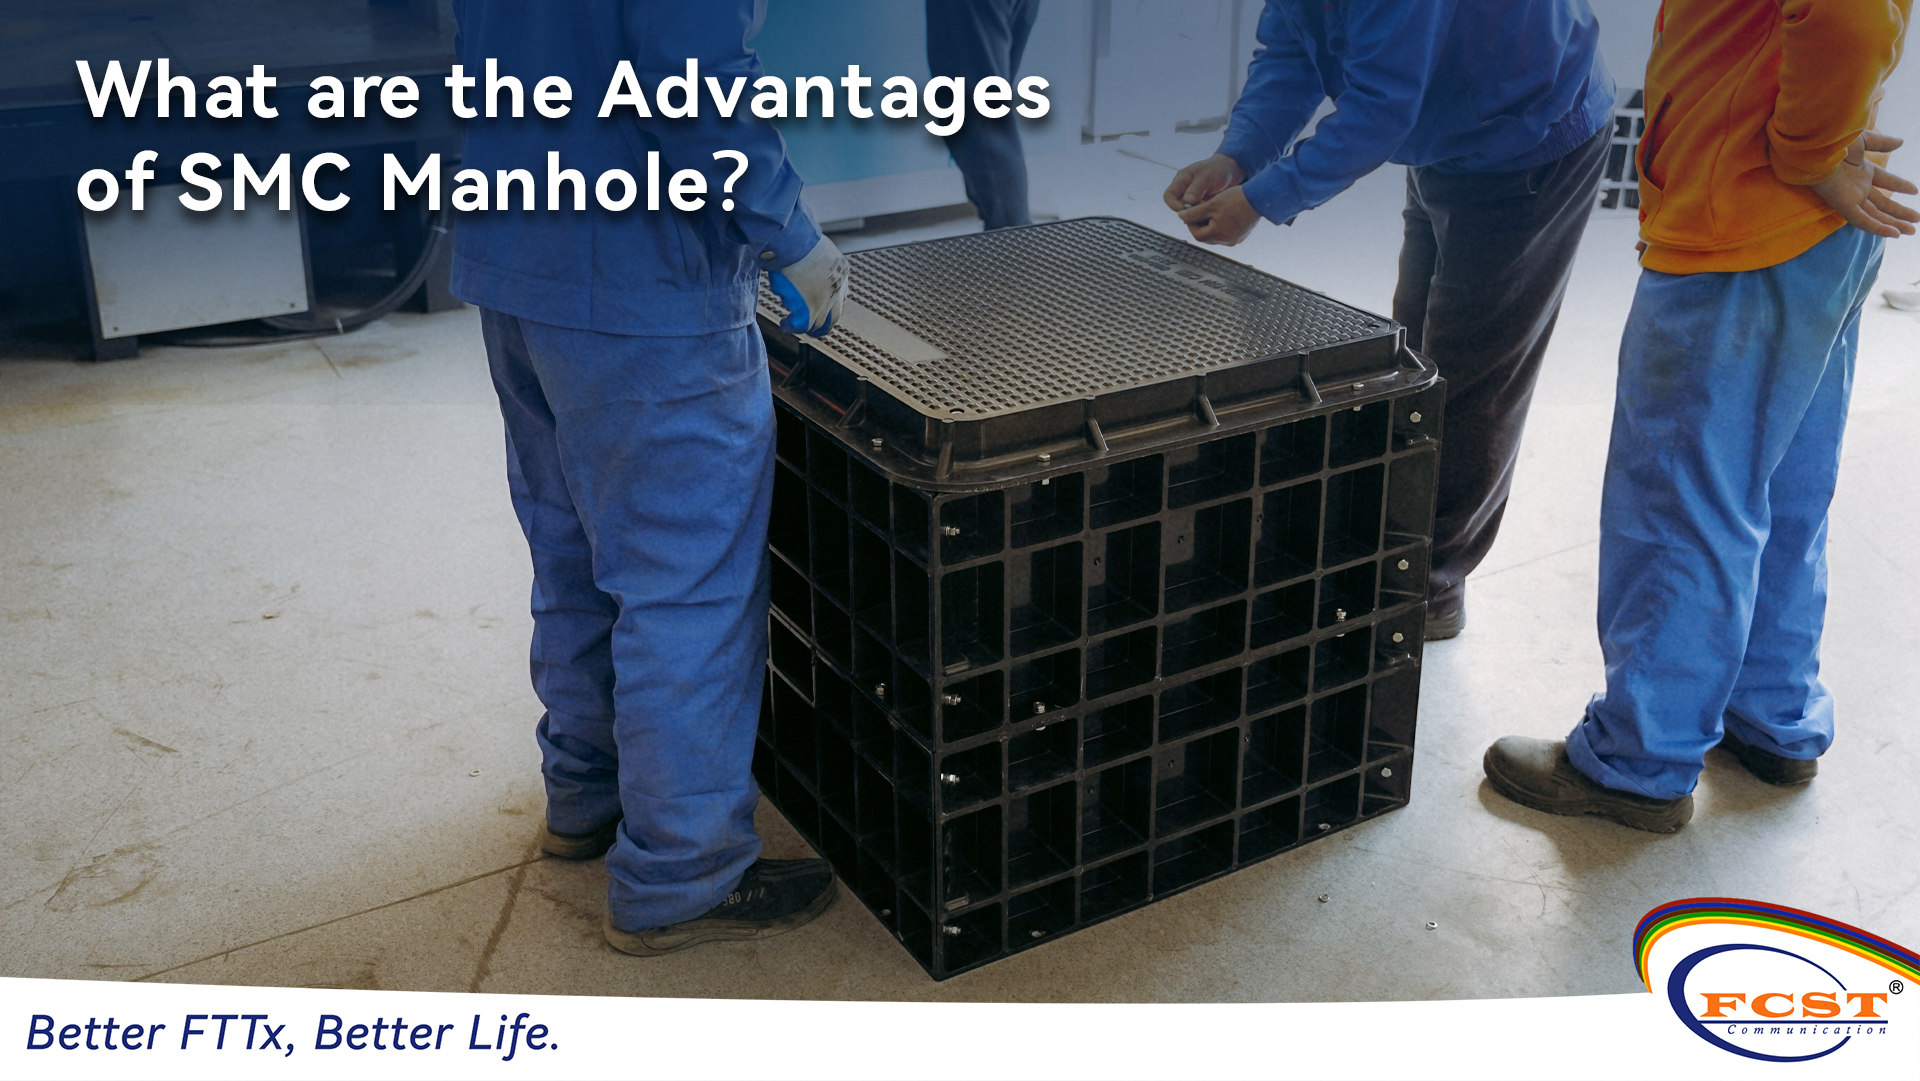 What are the Advantages of SMC Manhole？